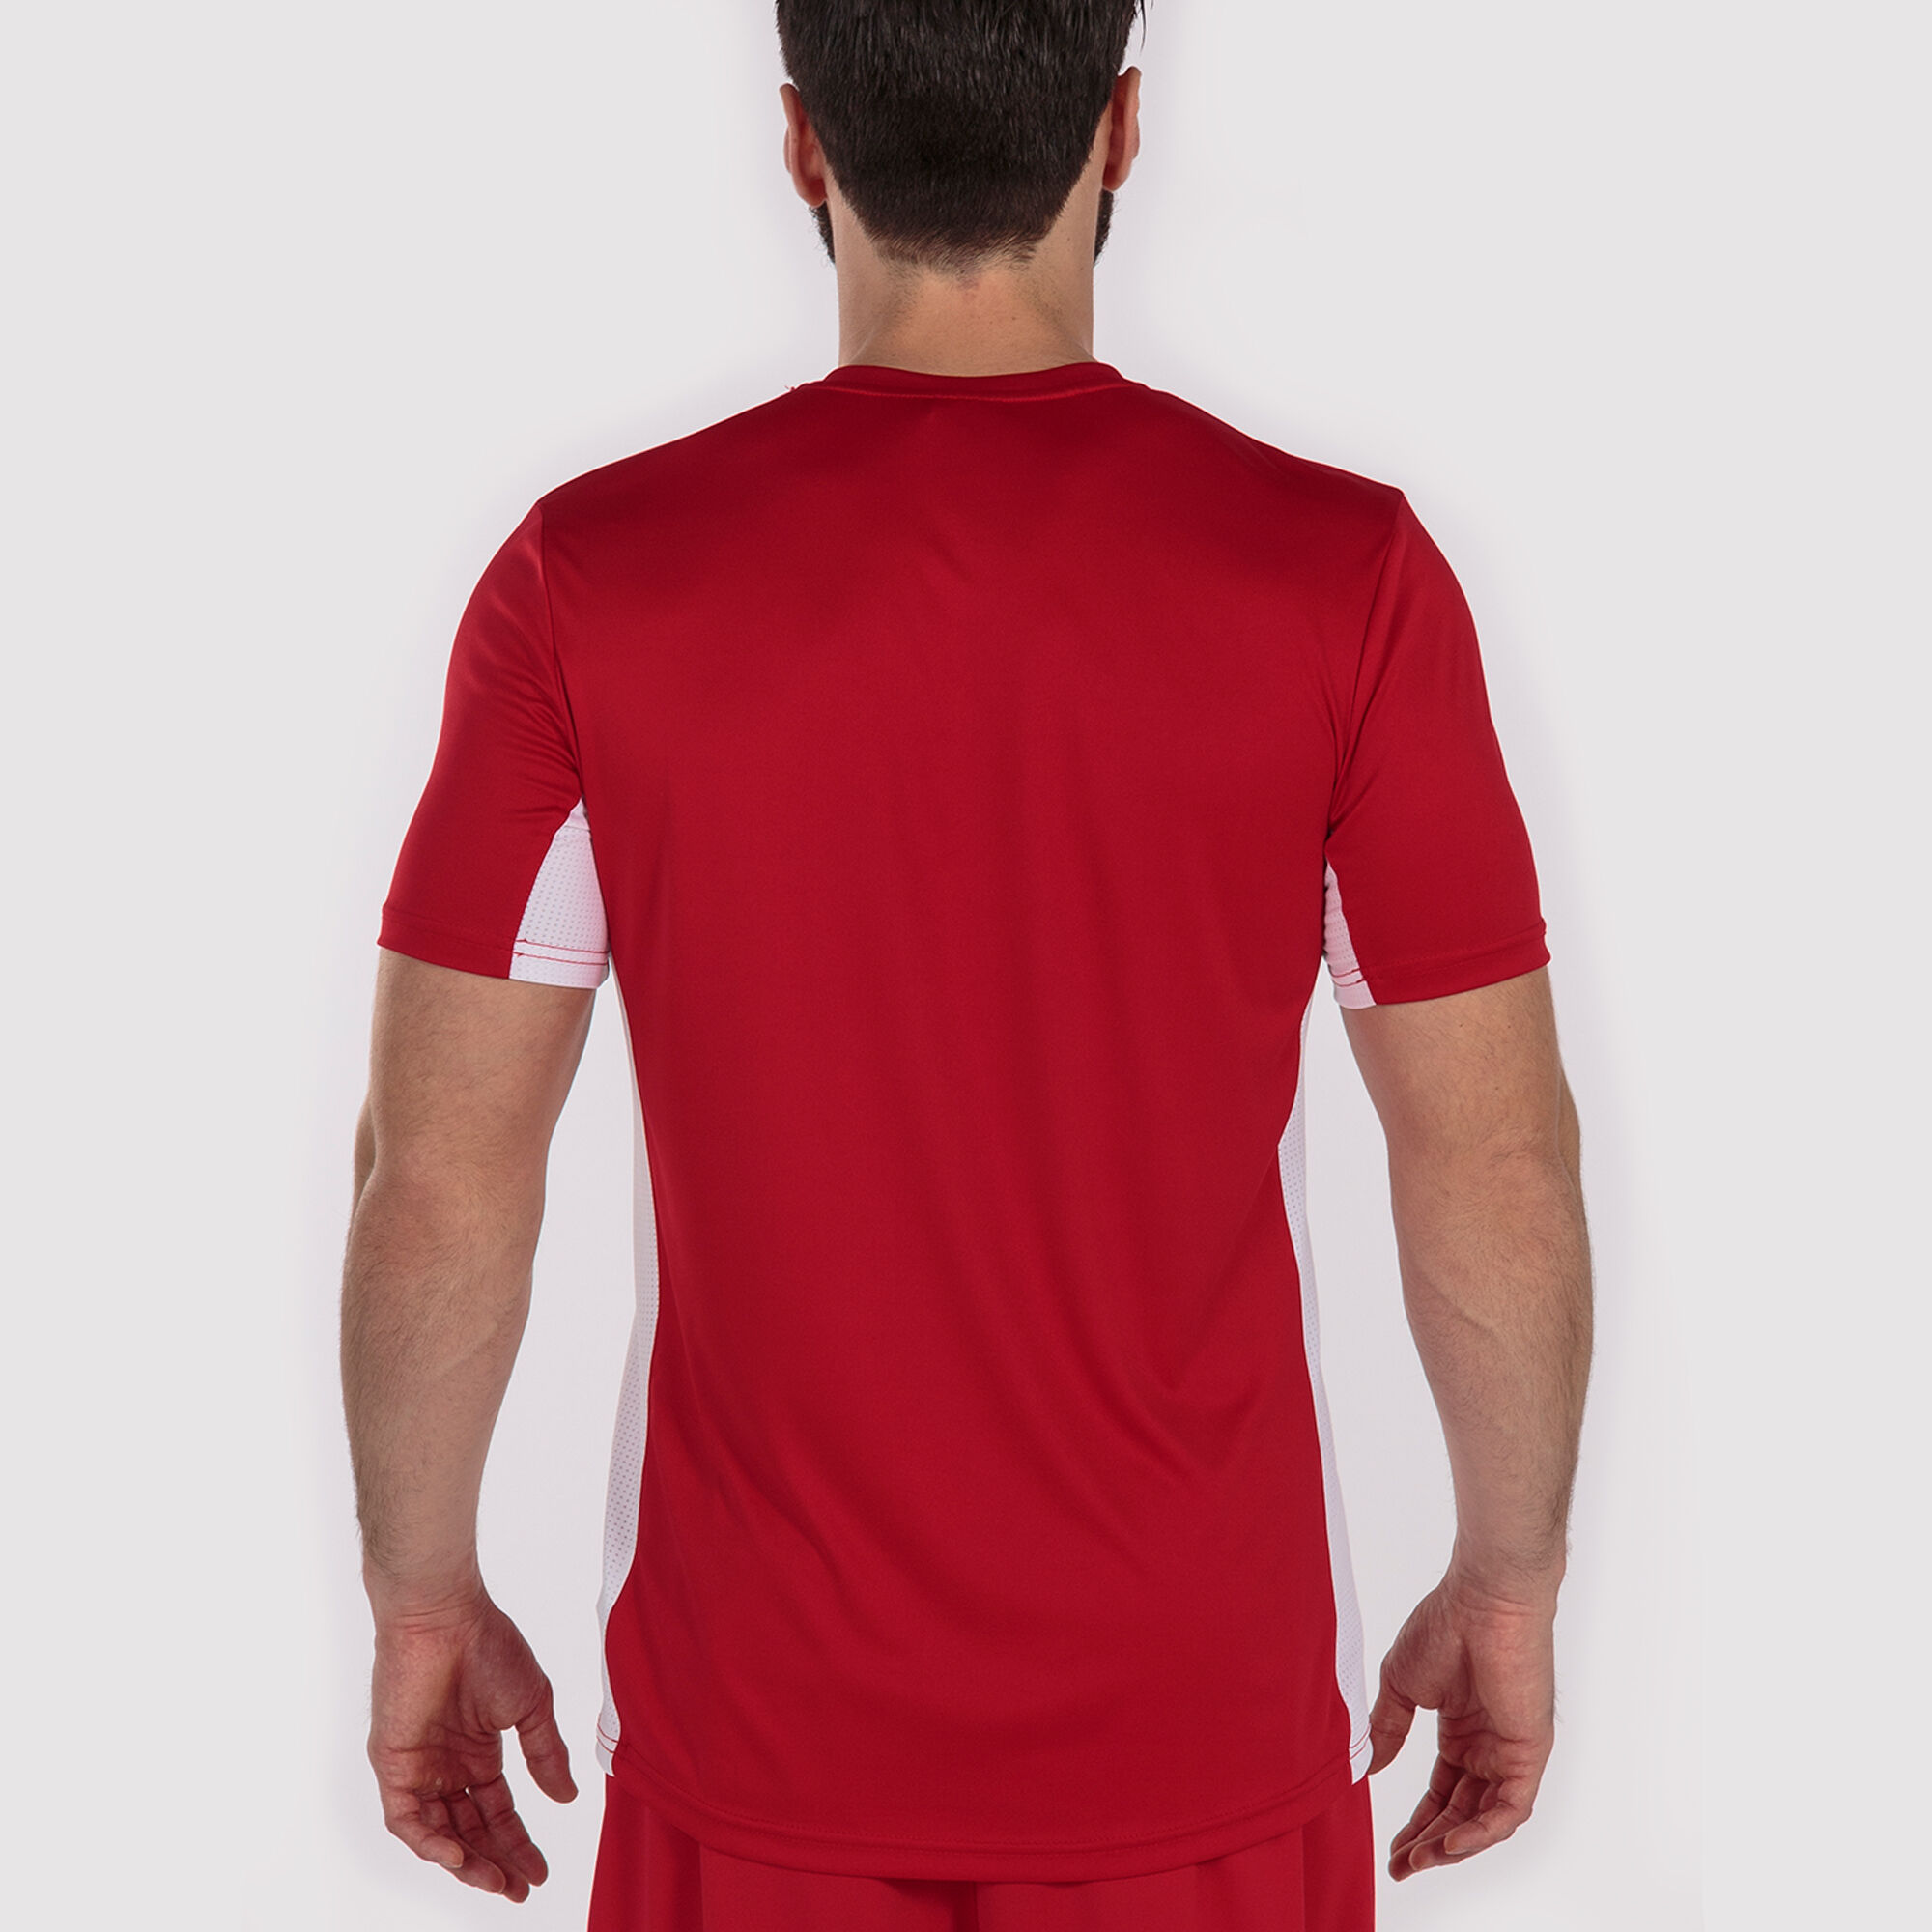 Maillot manches courtes homme Cosenza rouge blanc